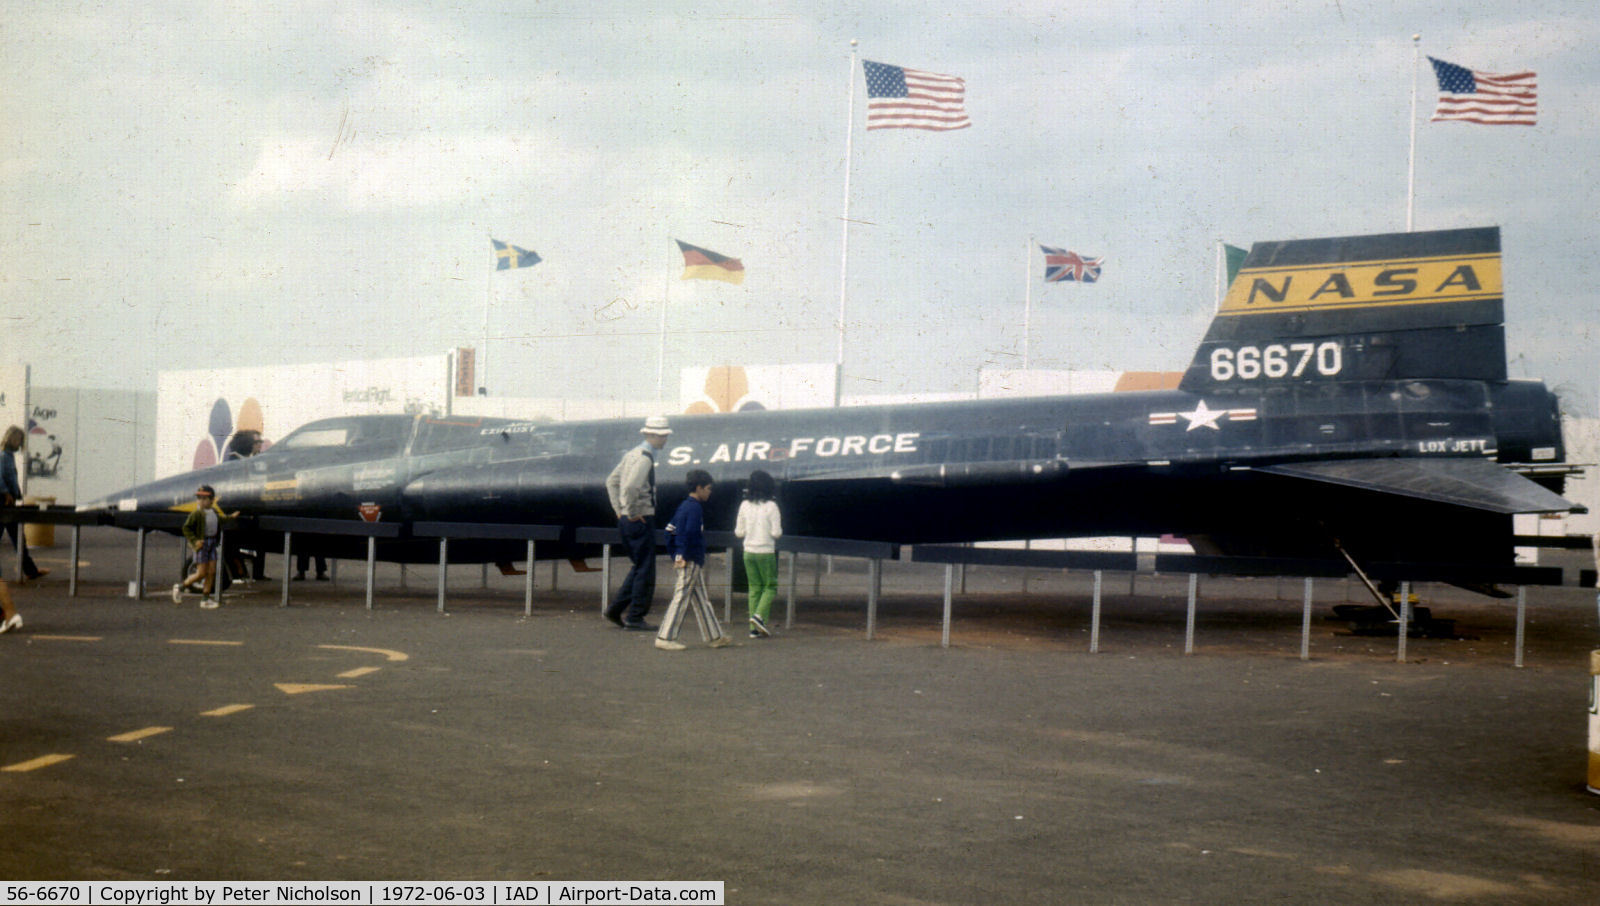 56-6670, 1956 North American X-15A C/N 240-1, On display at the U.S. International Transportation Exposition known as Transpo 72 held at Dulles International Airport, Virginia